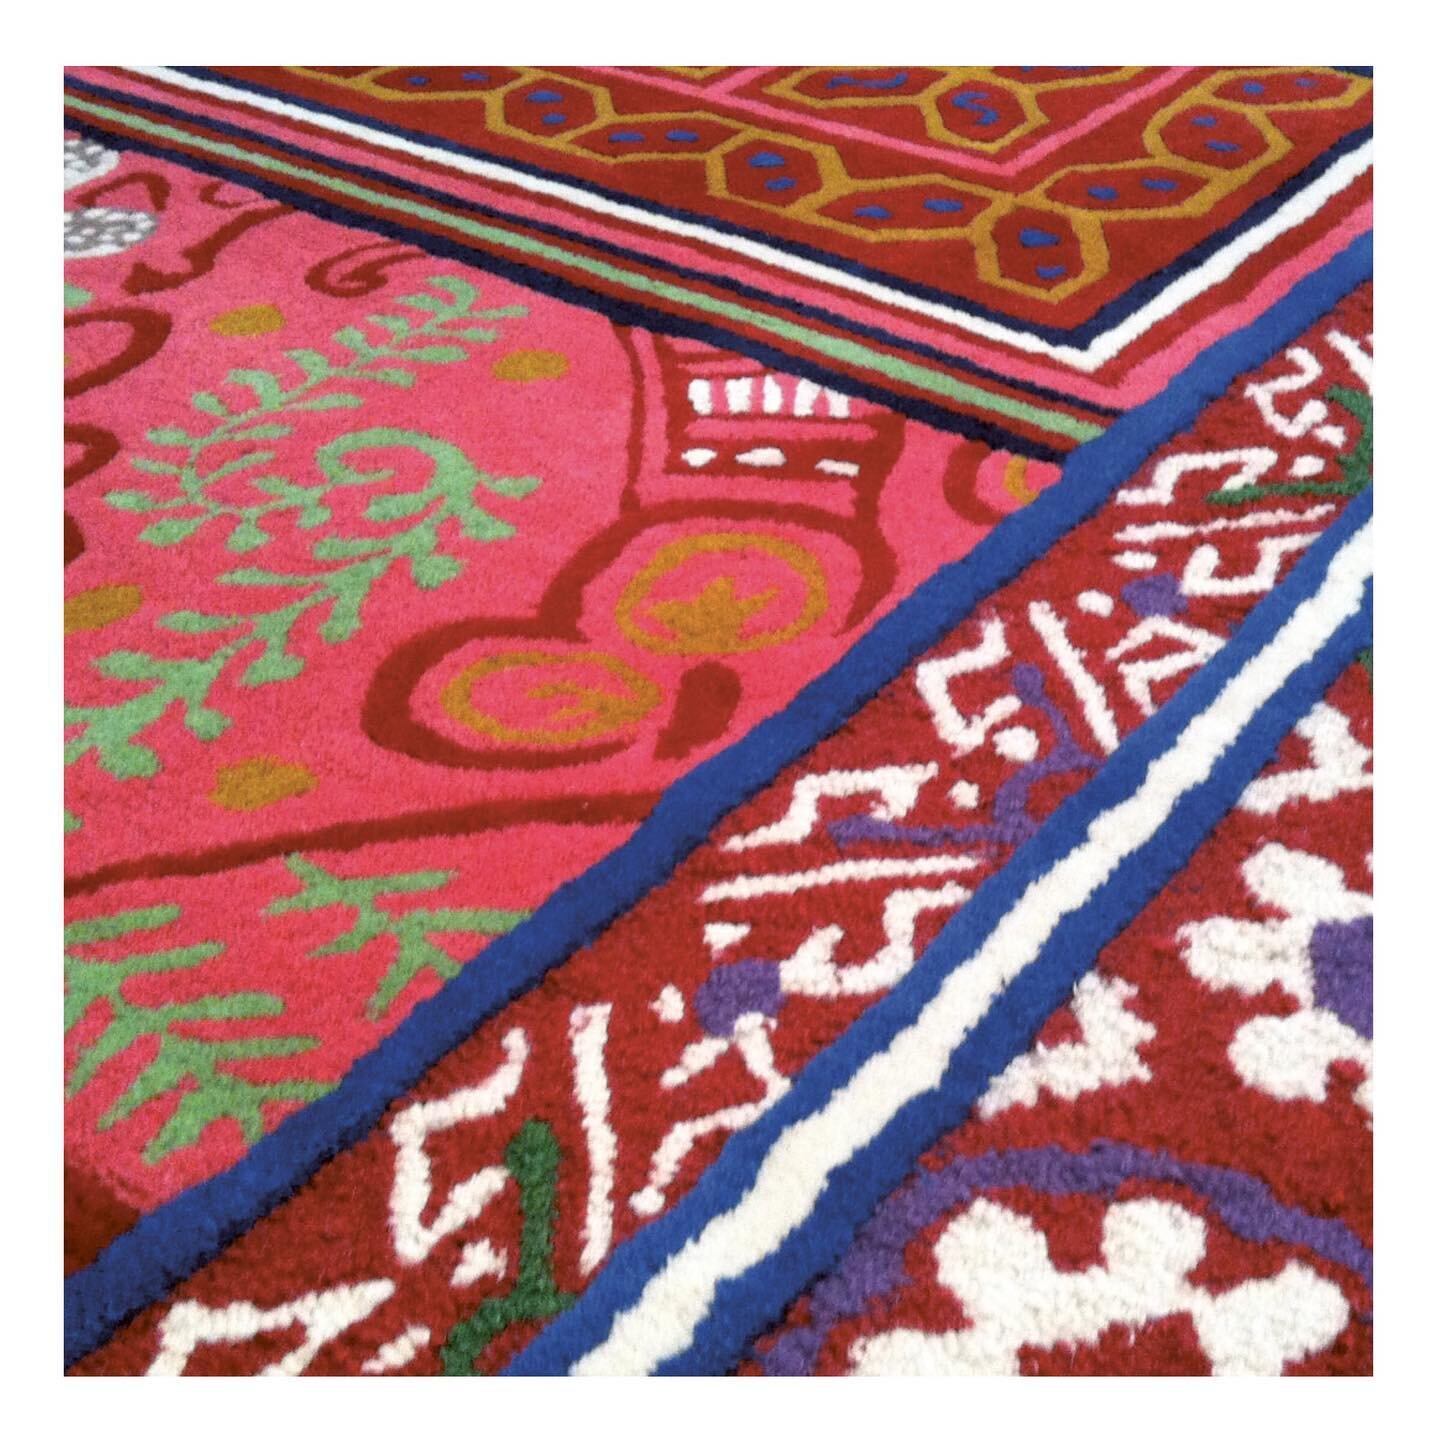 The colorful Baya, close up on this rug cheerfully inspired by Indian folklore and crafts and designed for @toulemondebochart 
Baya, un tapis aux couleurs et motifs inspirés du folklore indien en laine et soie végétale.
&bull;&bull;
#florenceboure